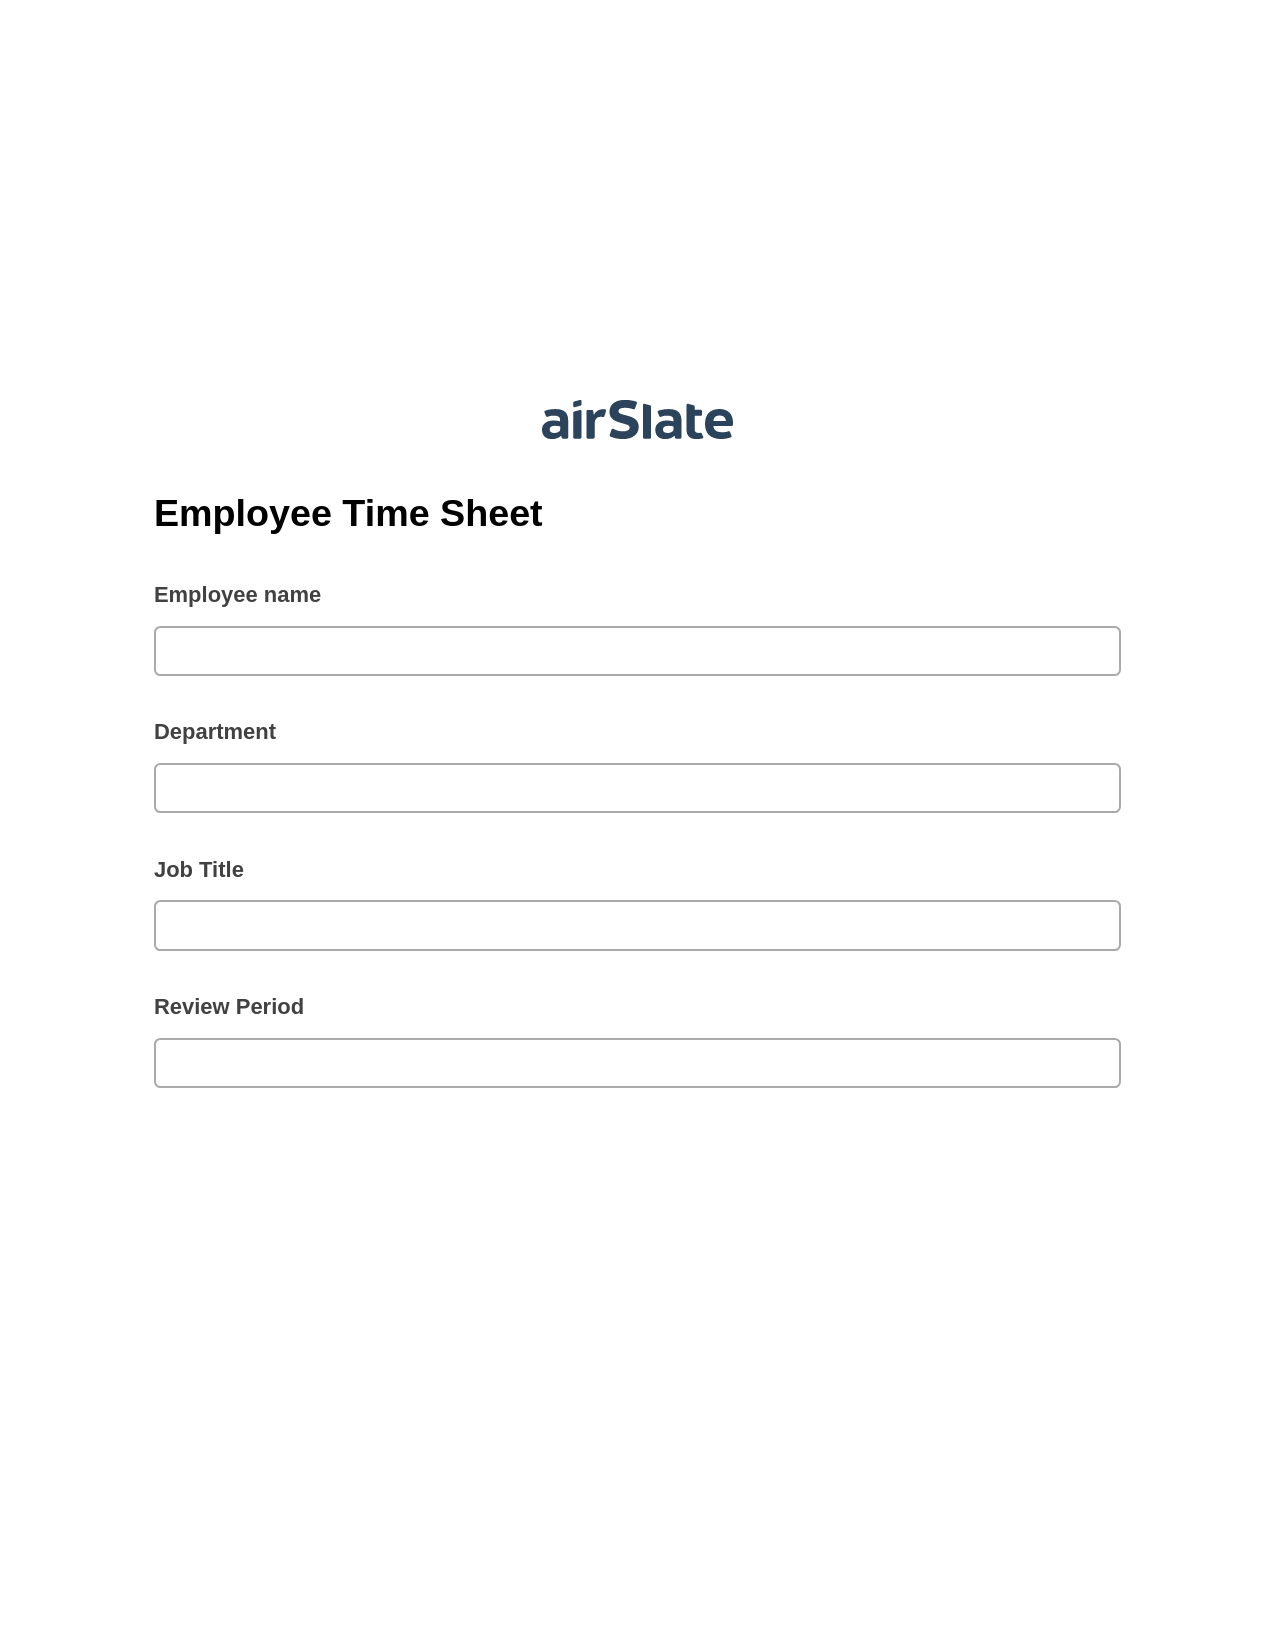 Employee Time Sheet Pre-fill Dropdowns from Smartsheet Bot, Update Audit Trail Bot, Archive to SharePoint Folder Bot